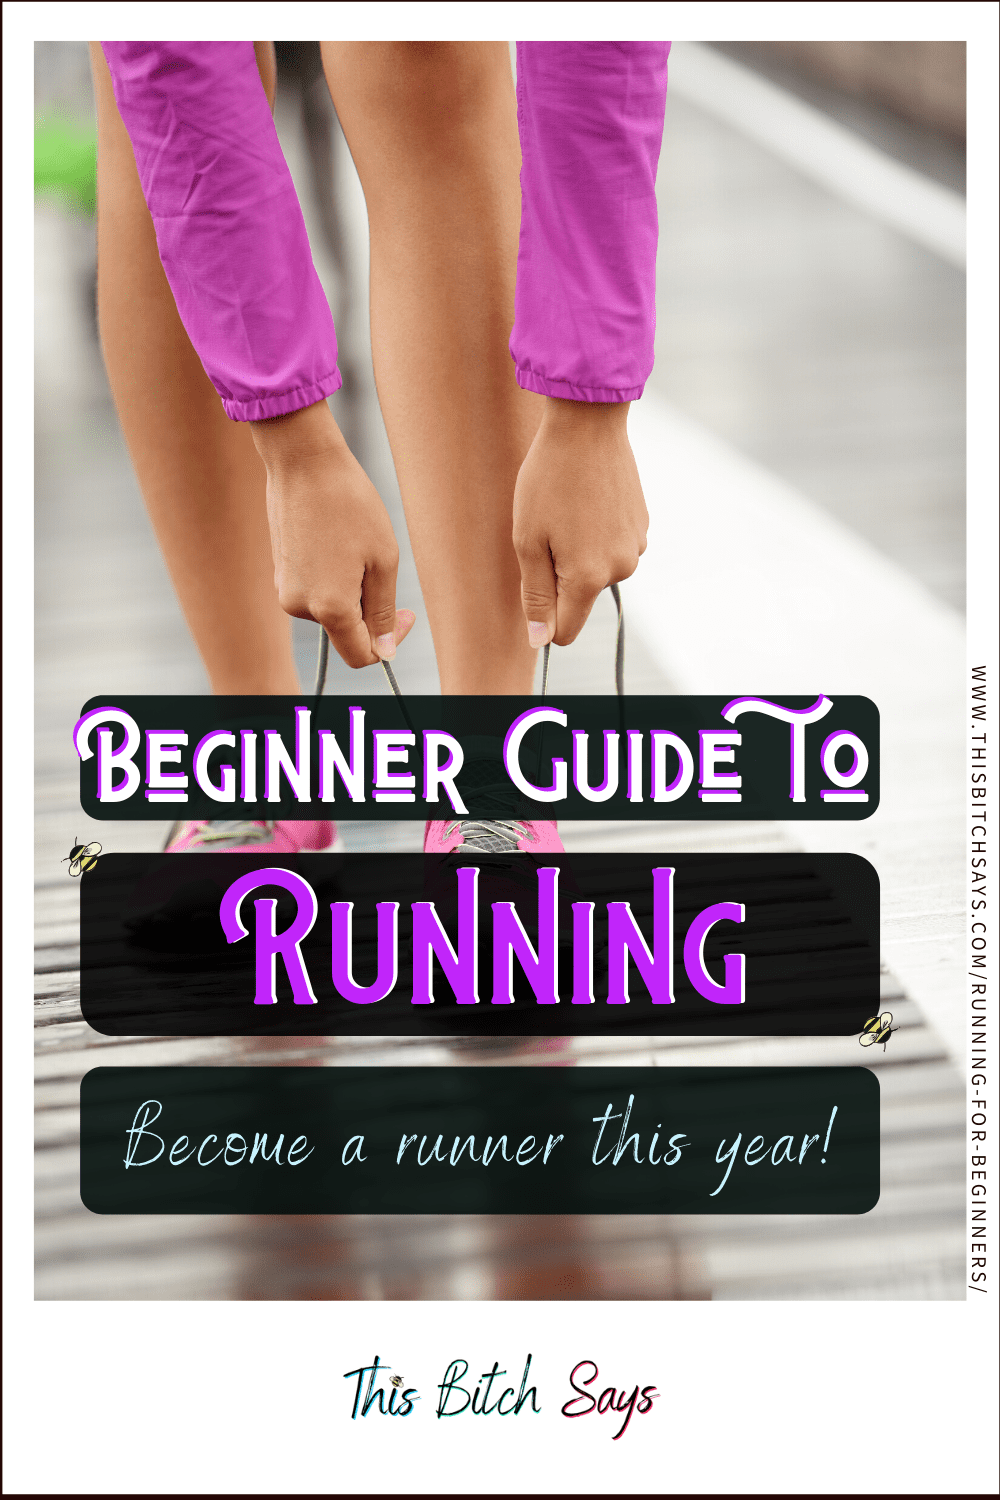 For Your Fitness: beginner guide to running (become a runner this year)